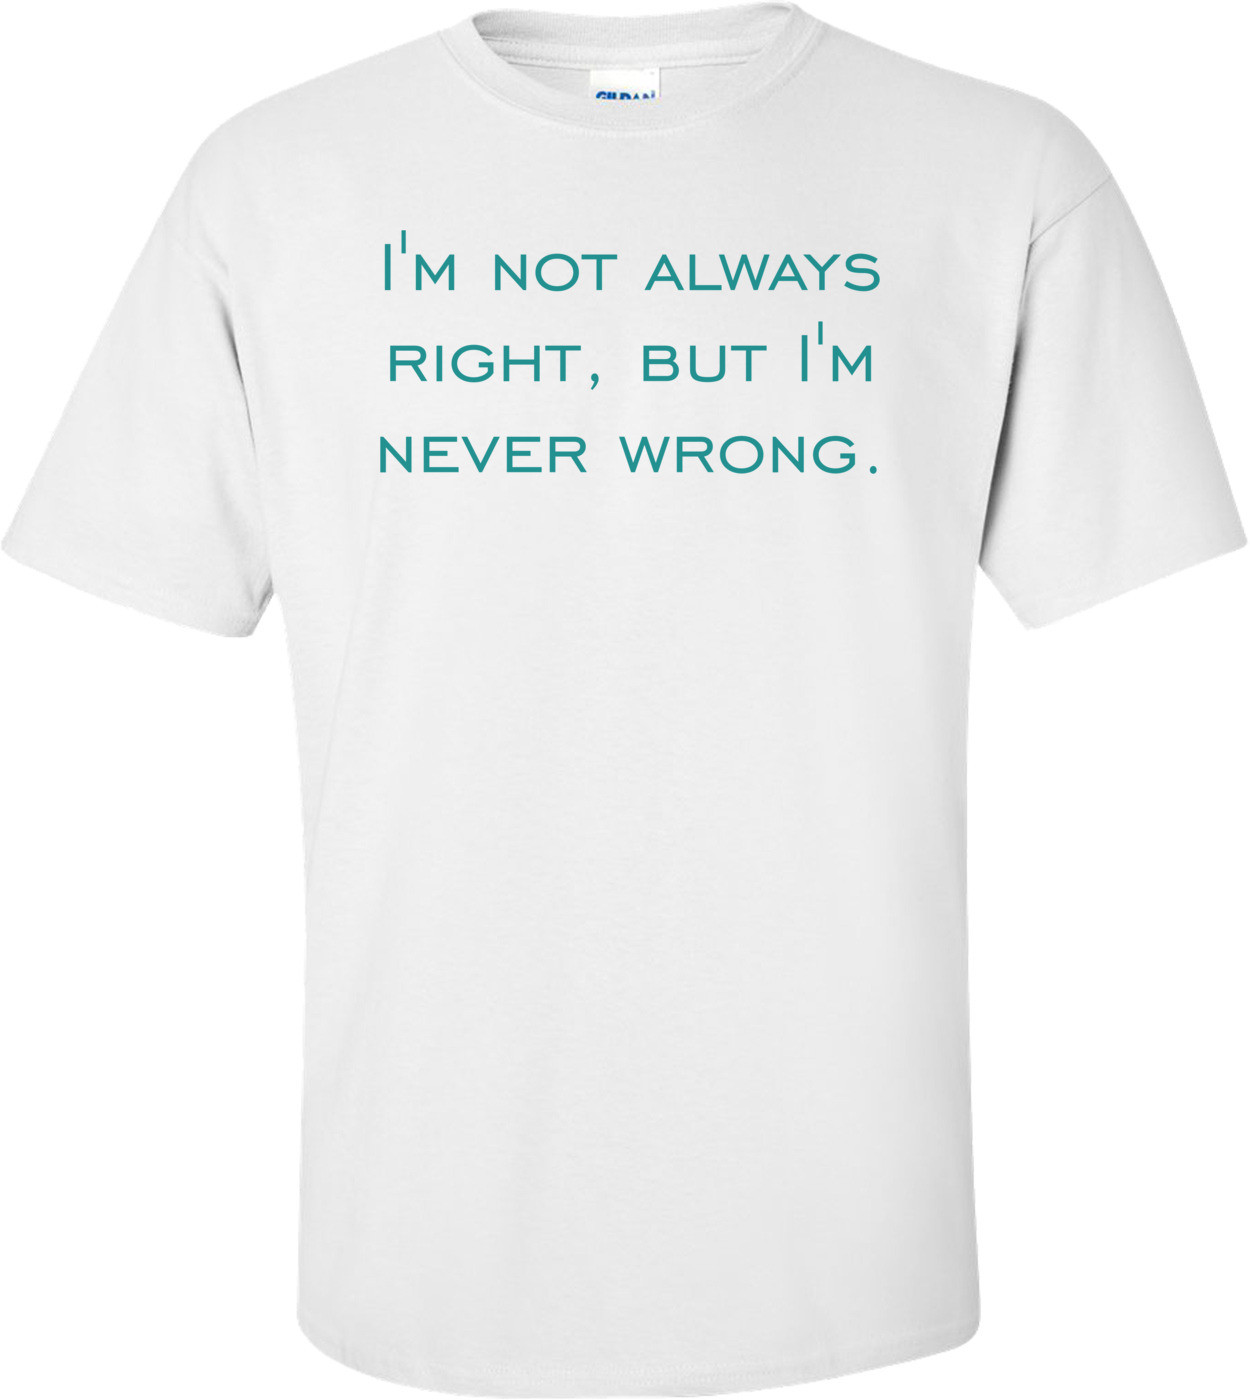 I'm not always right, but I'm never wrong. Shirt